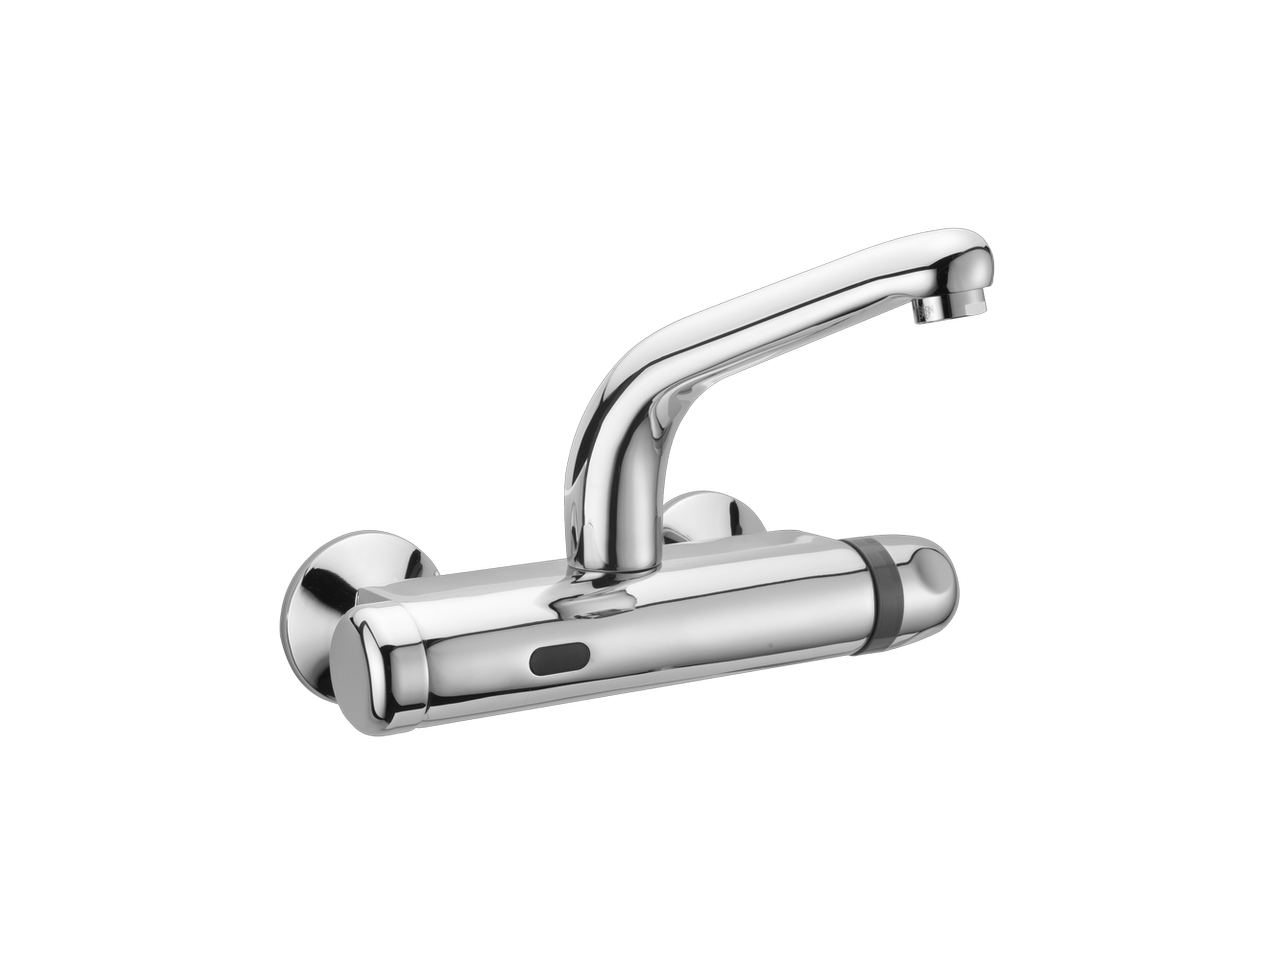 Thermo-electronic wall-mounted sink mixer THERMO - v1